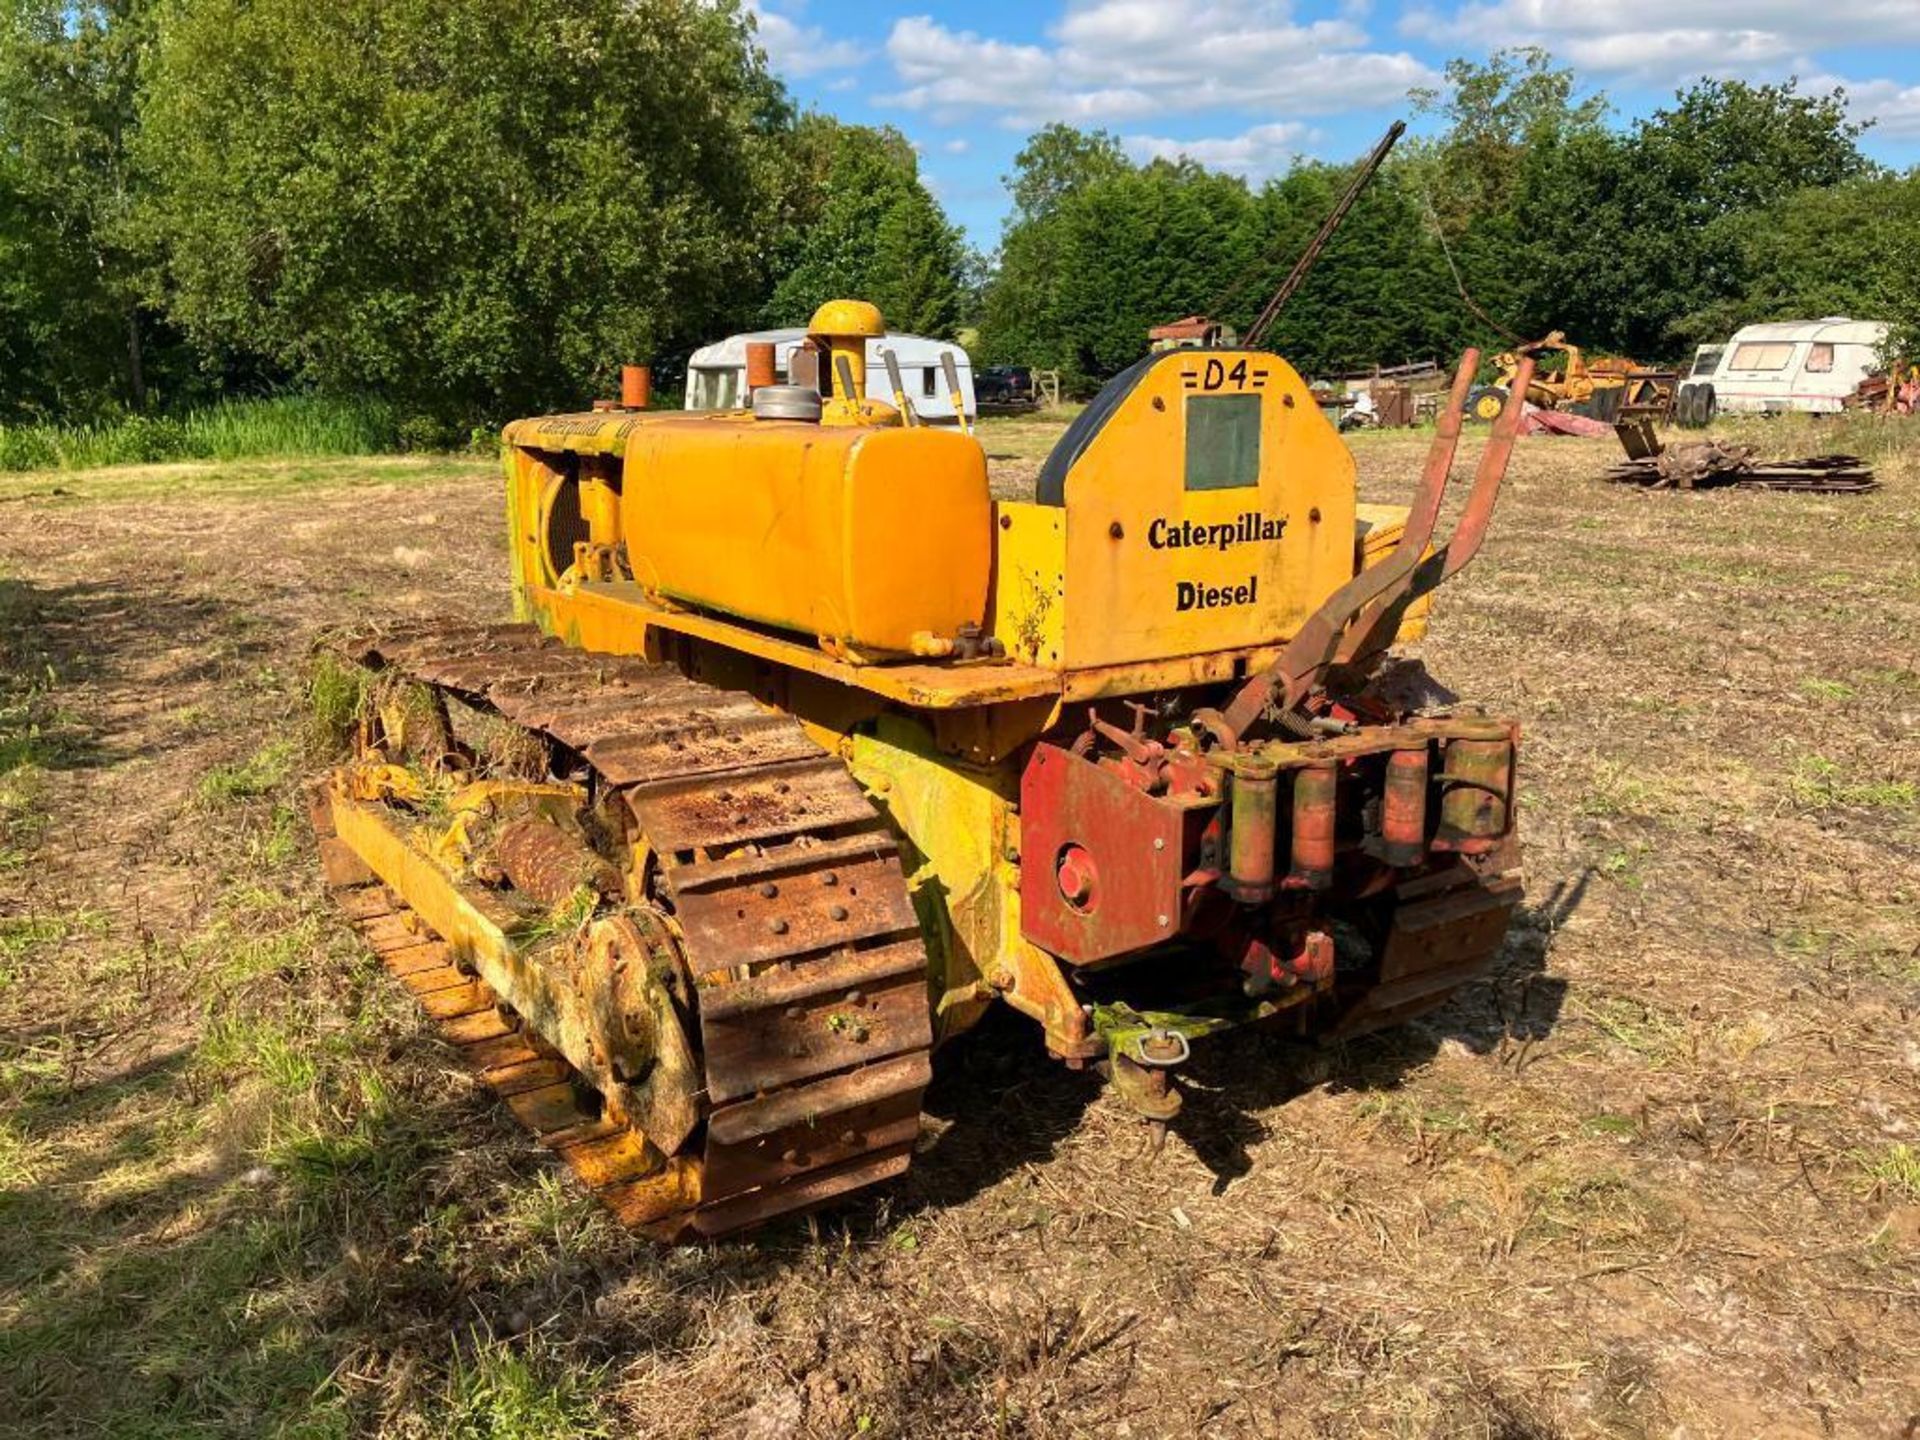 1949 Caterpillar D4 wide gauge metal tracked crawler with 16" tracks , swinging drawbar and rear cab - Image 7 of 18